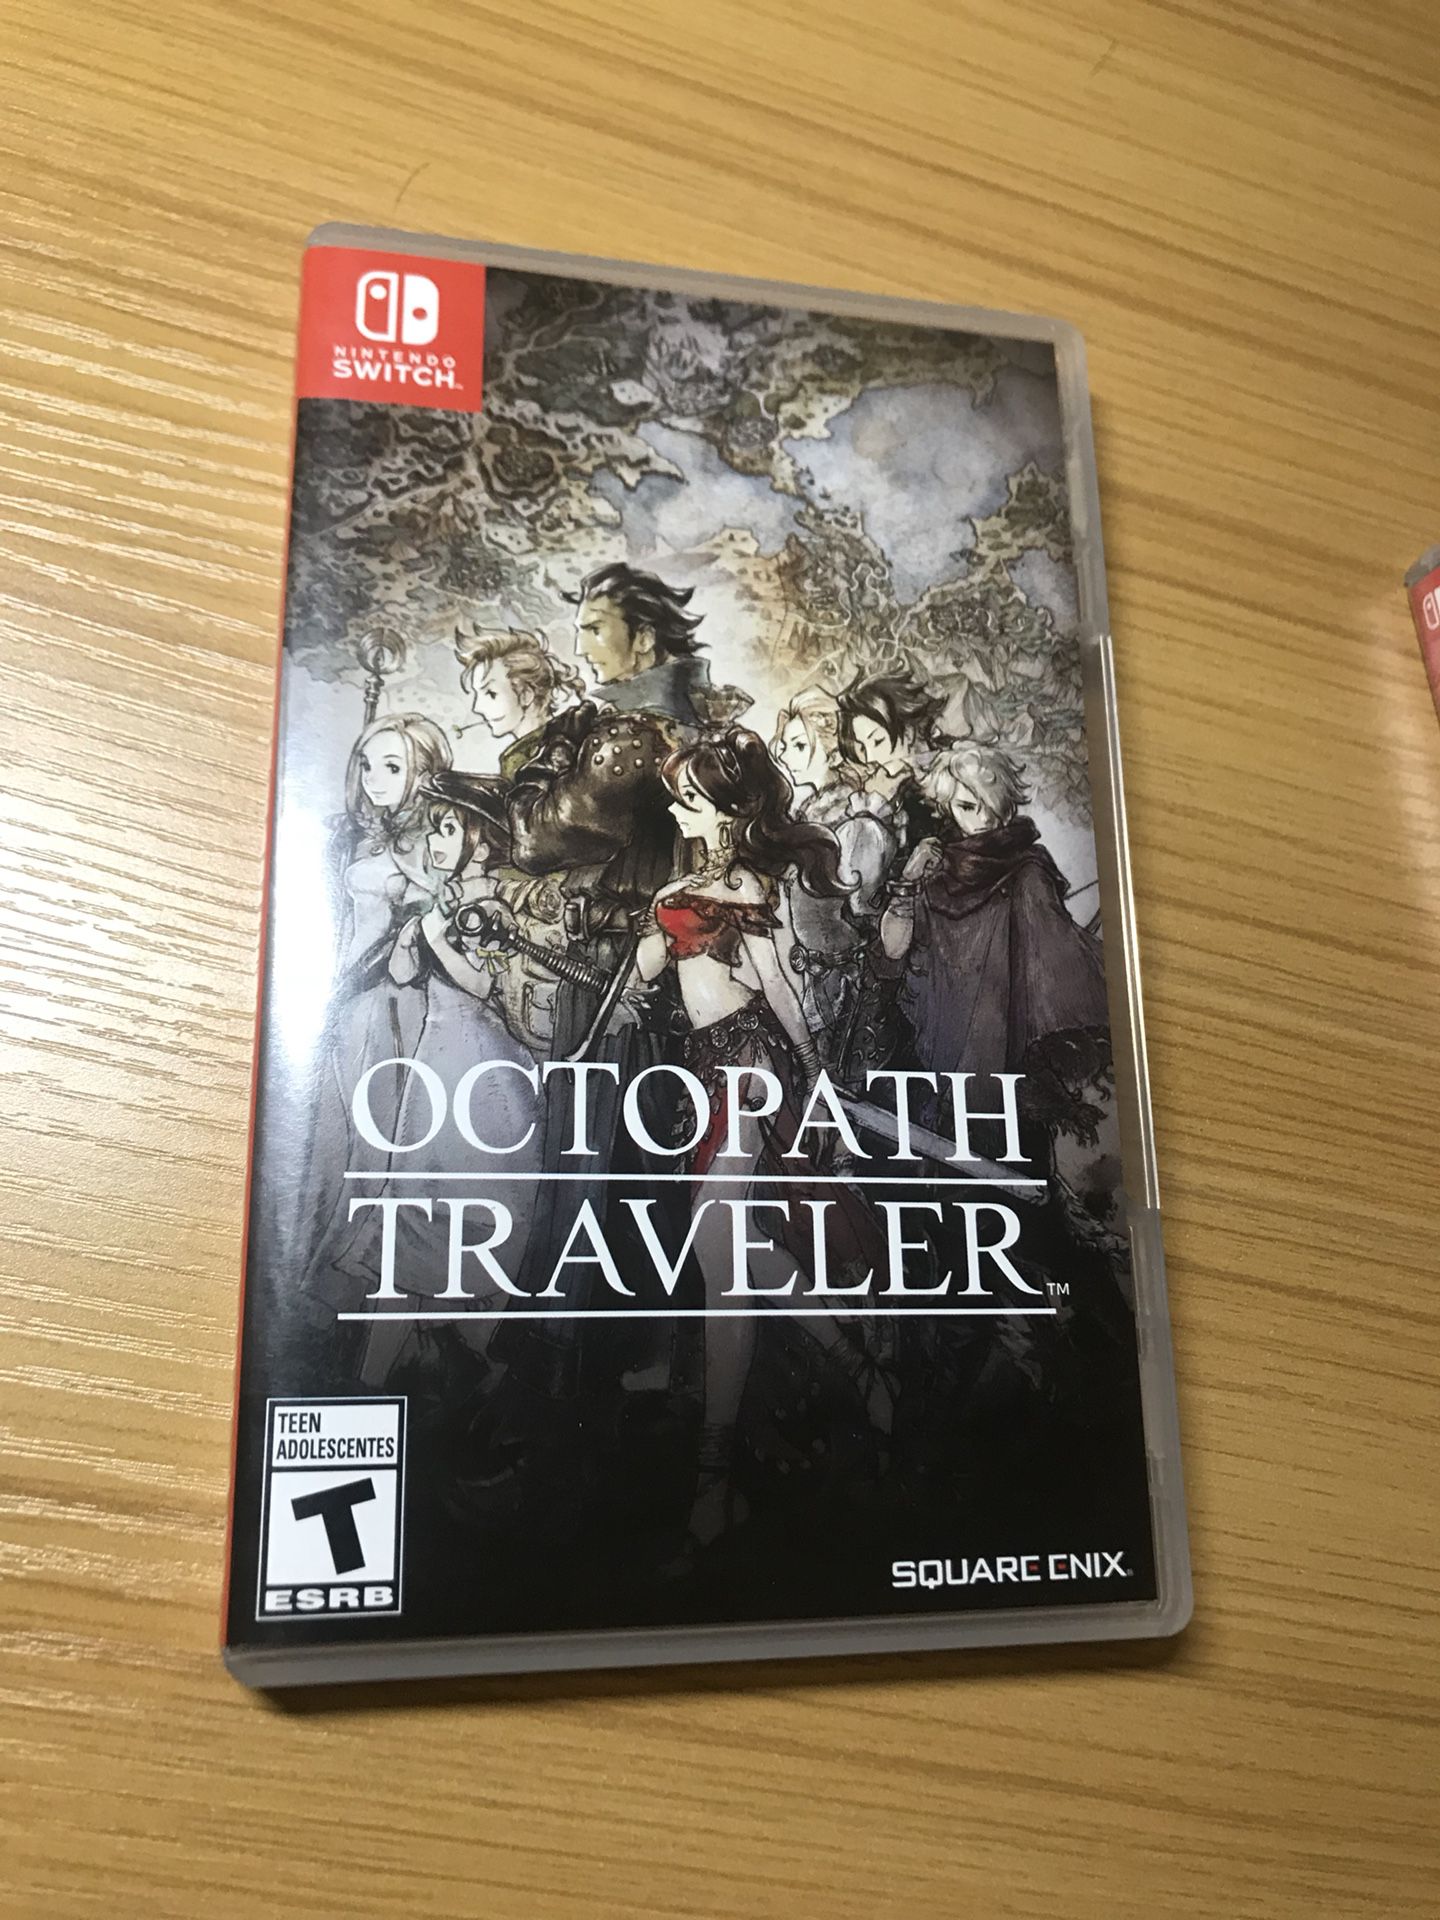 Nintendo Switch games, Octopath travelers and Pokémon let’s go